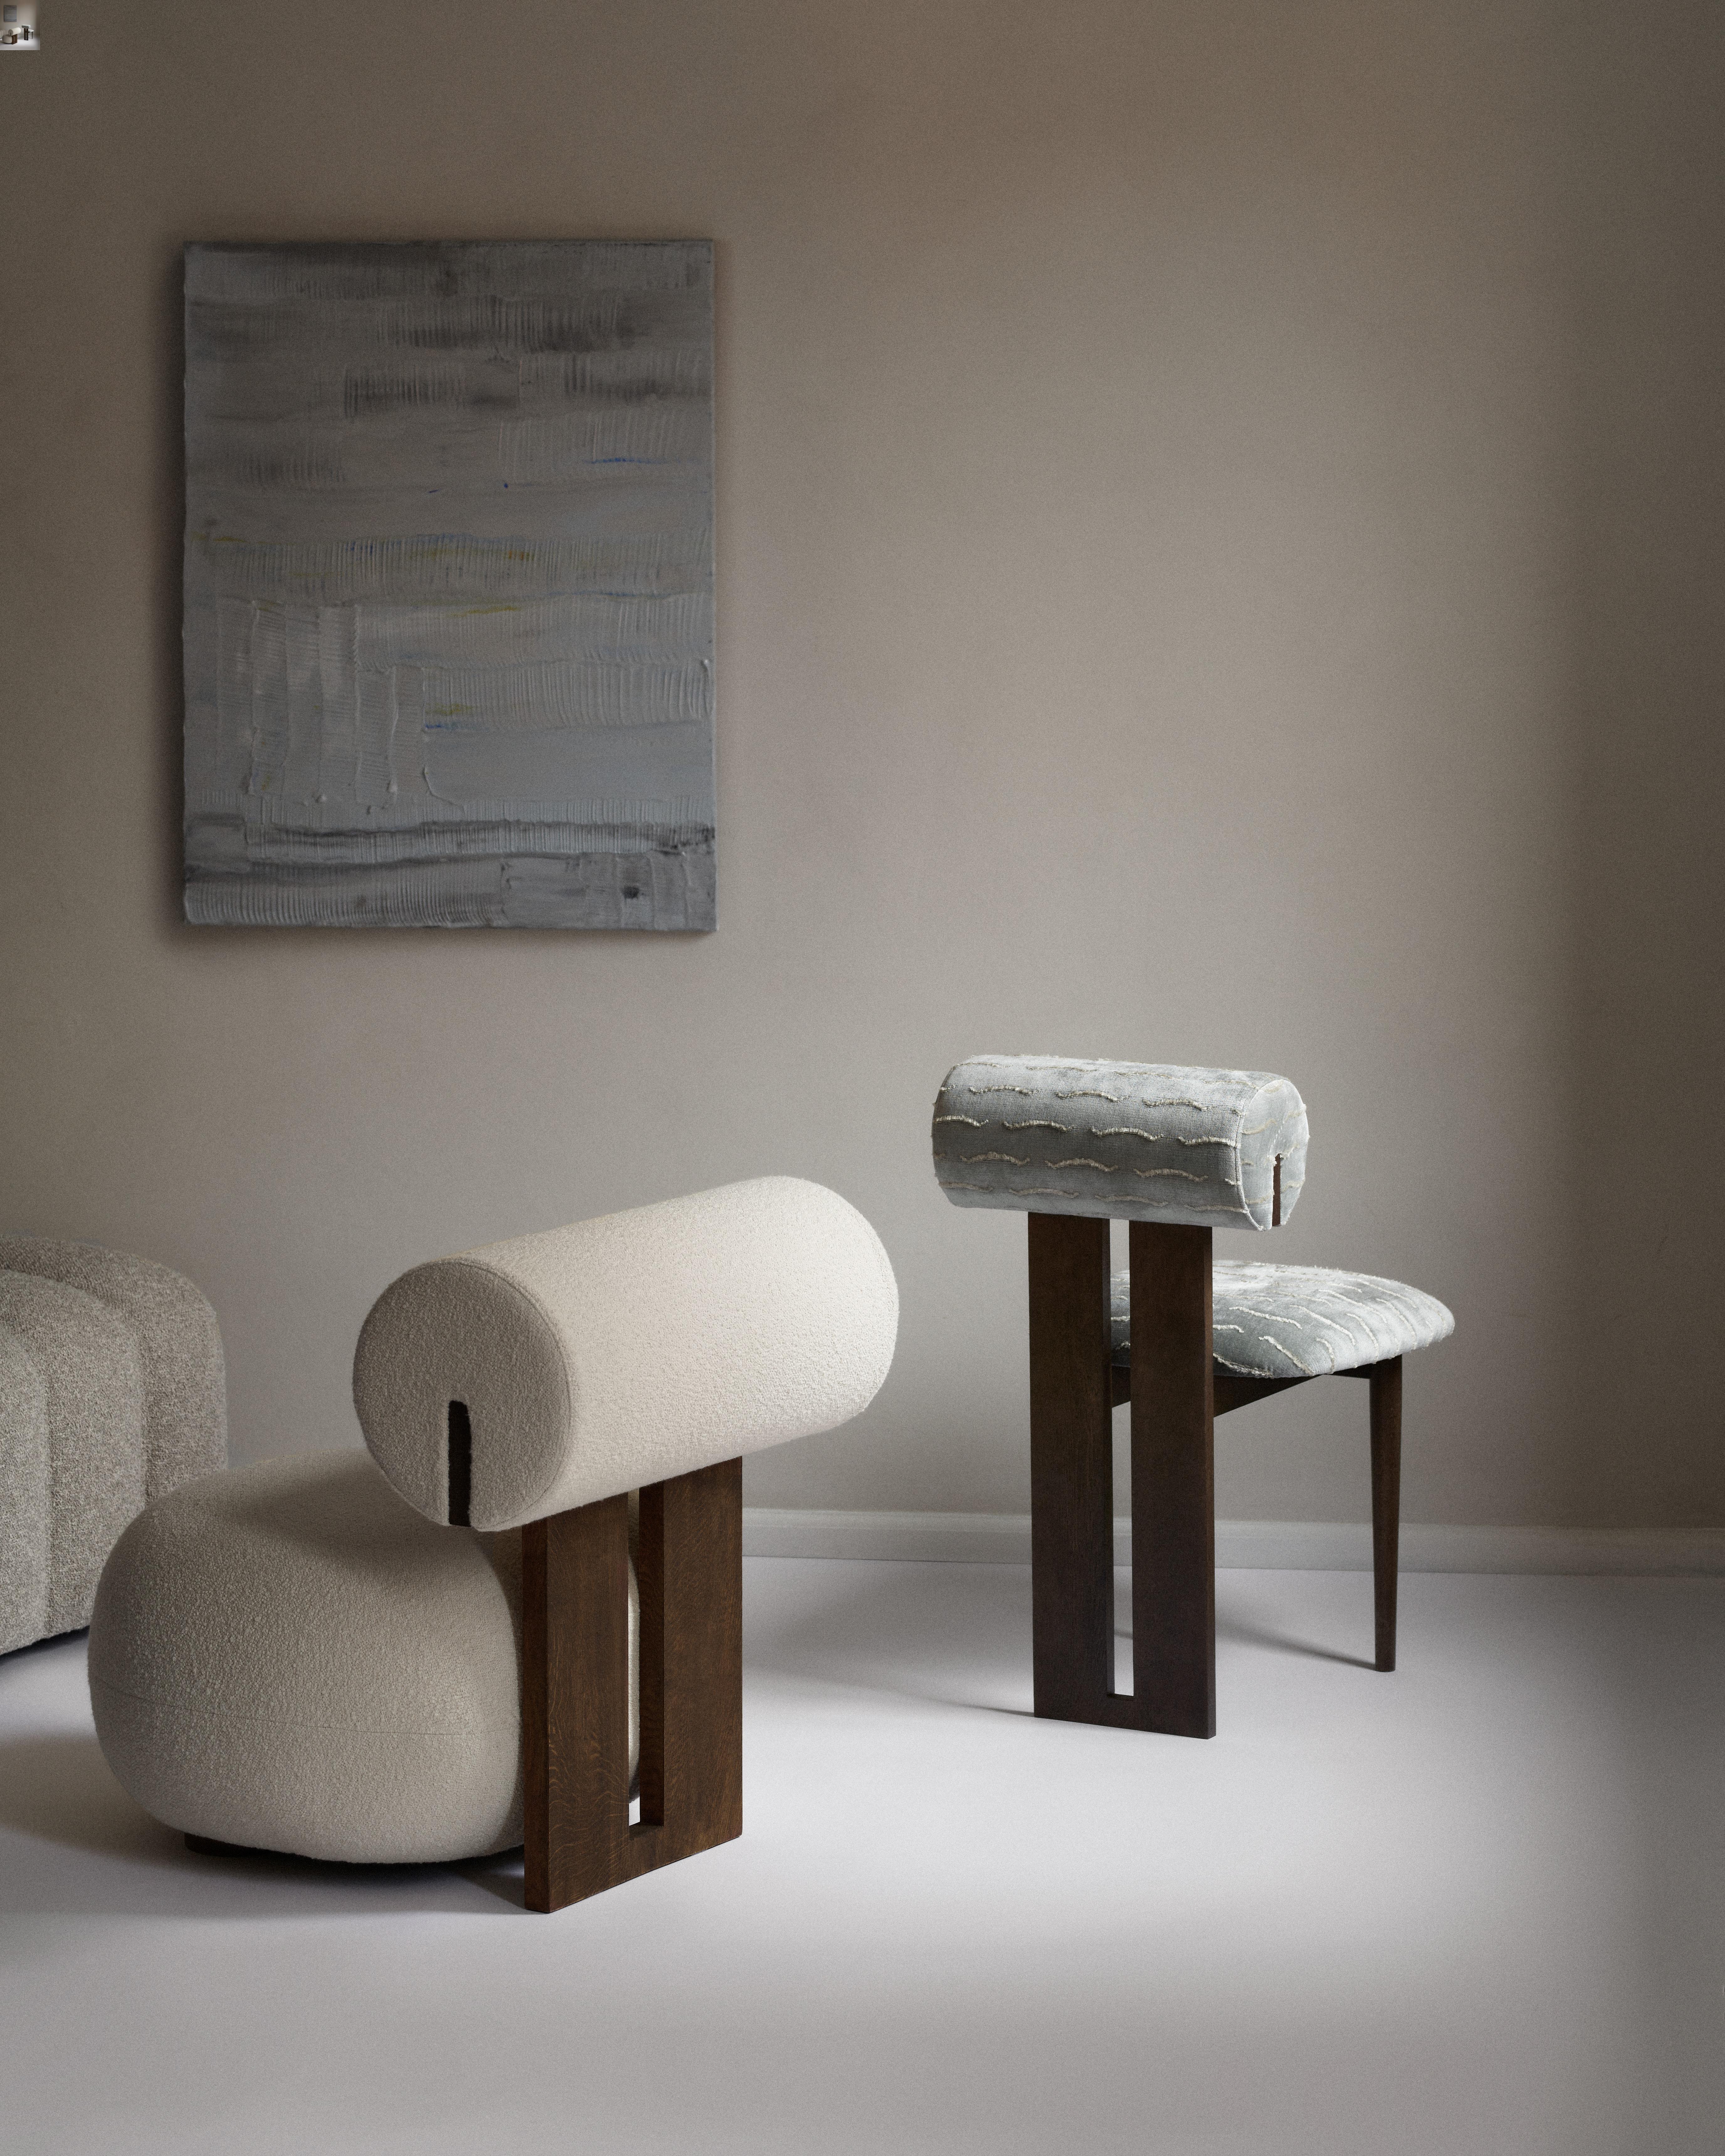 Contemporary 'Hippo' Chair by Norr11, Light Smoked Oak, Kvadrat Canvas 694 For Sale